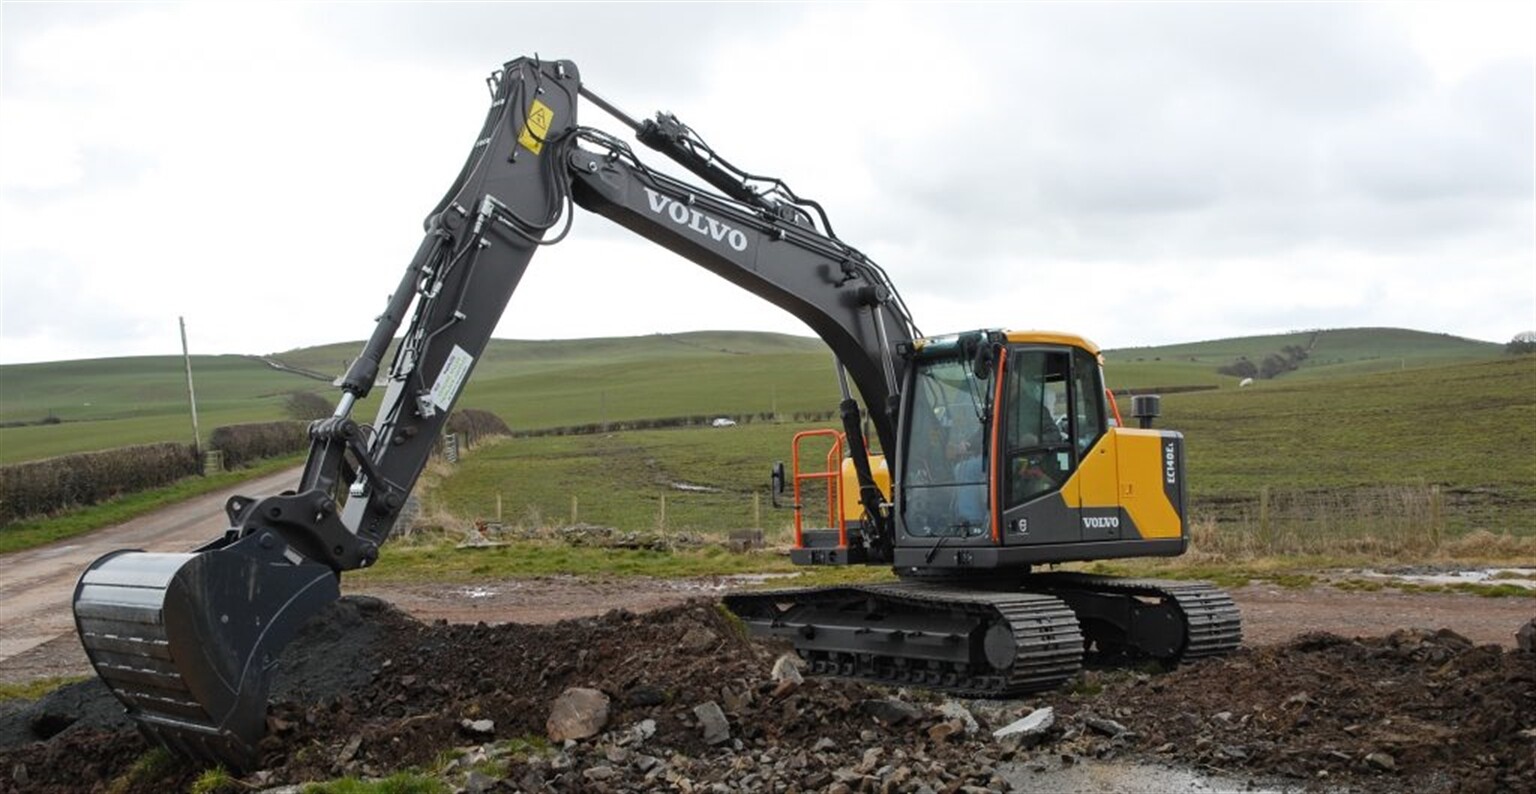 Volvo EC140E goes to work on the farm